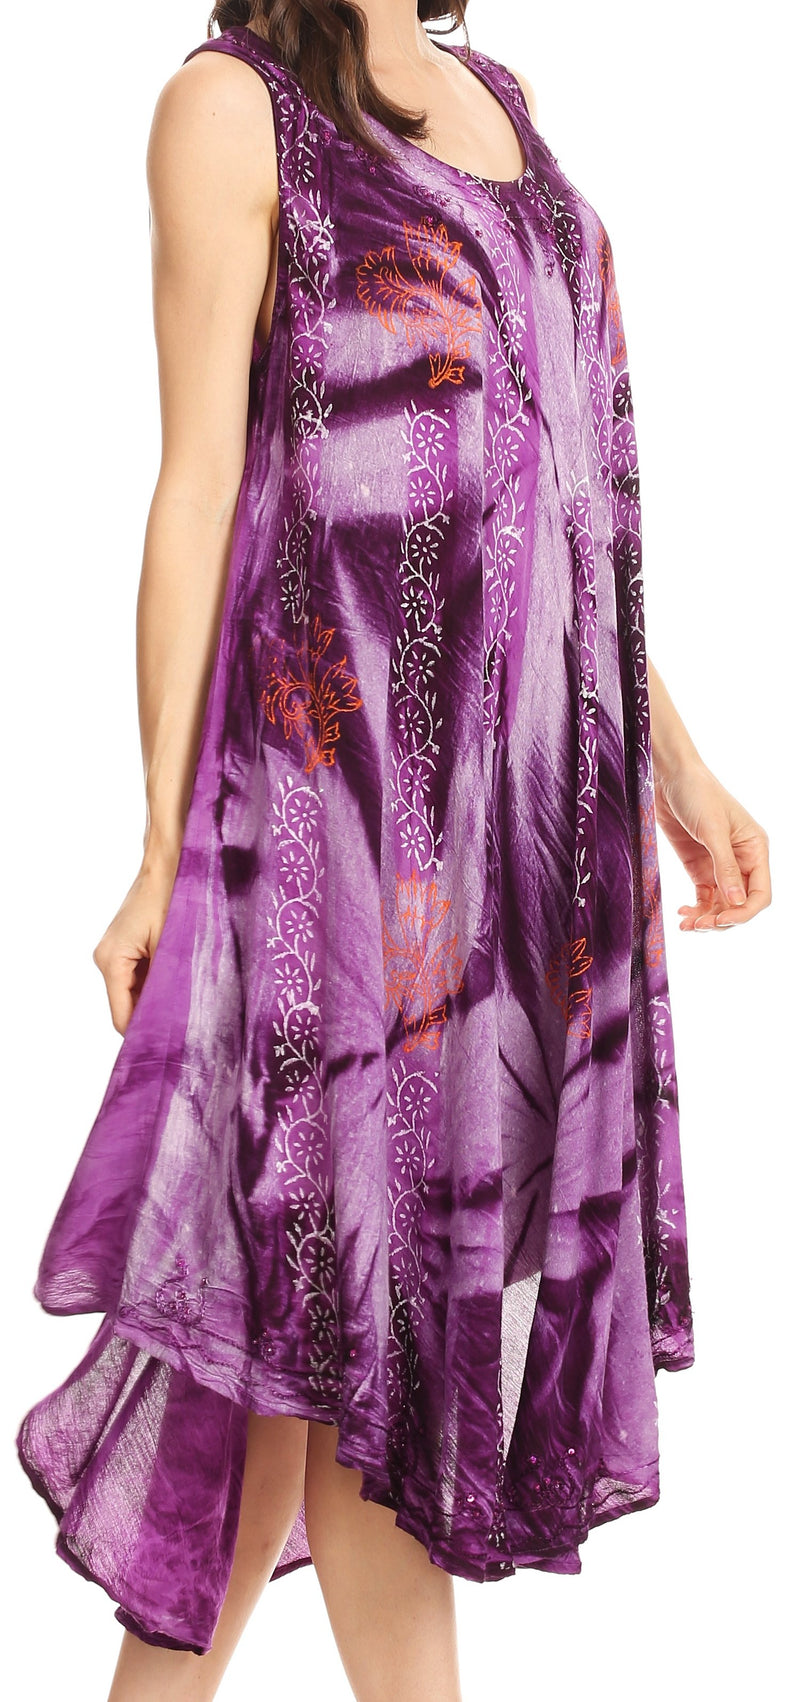 Sakkas Mariana Tie Dye Vine Print Dress / Cover Up with Sequins and Embroidery